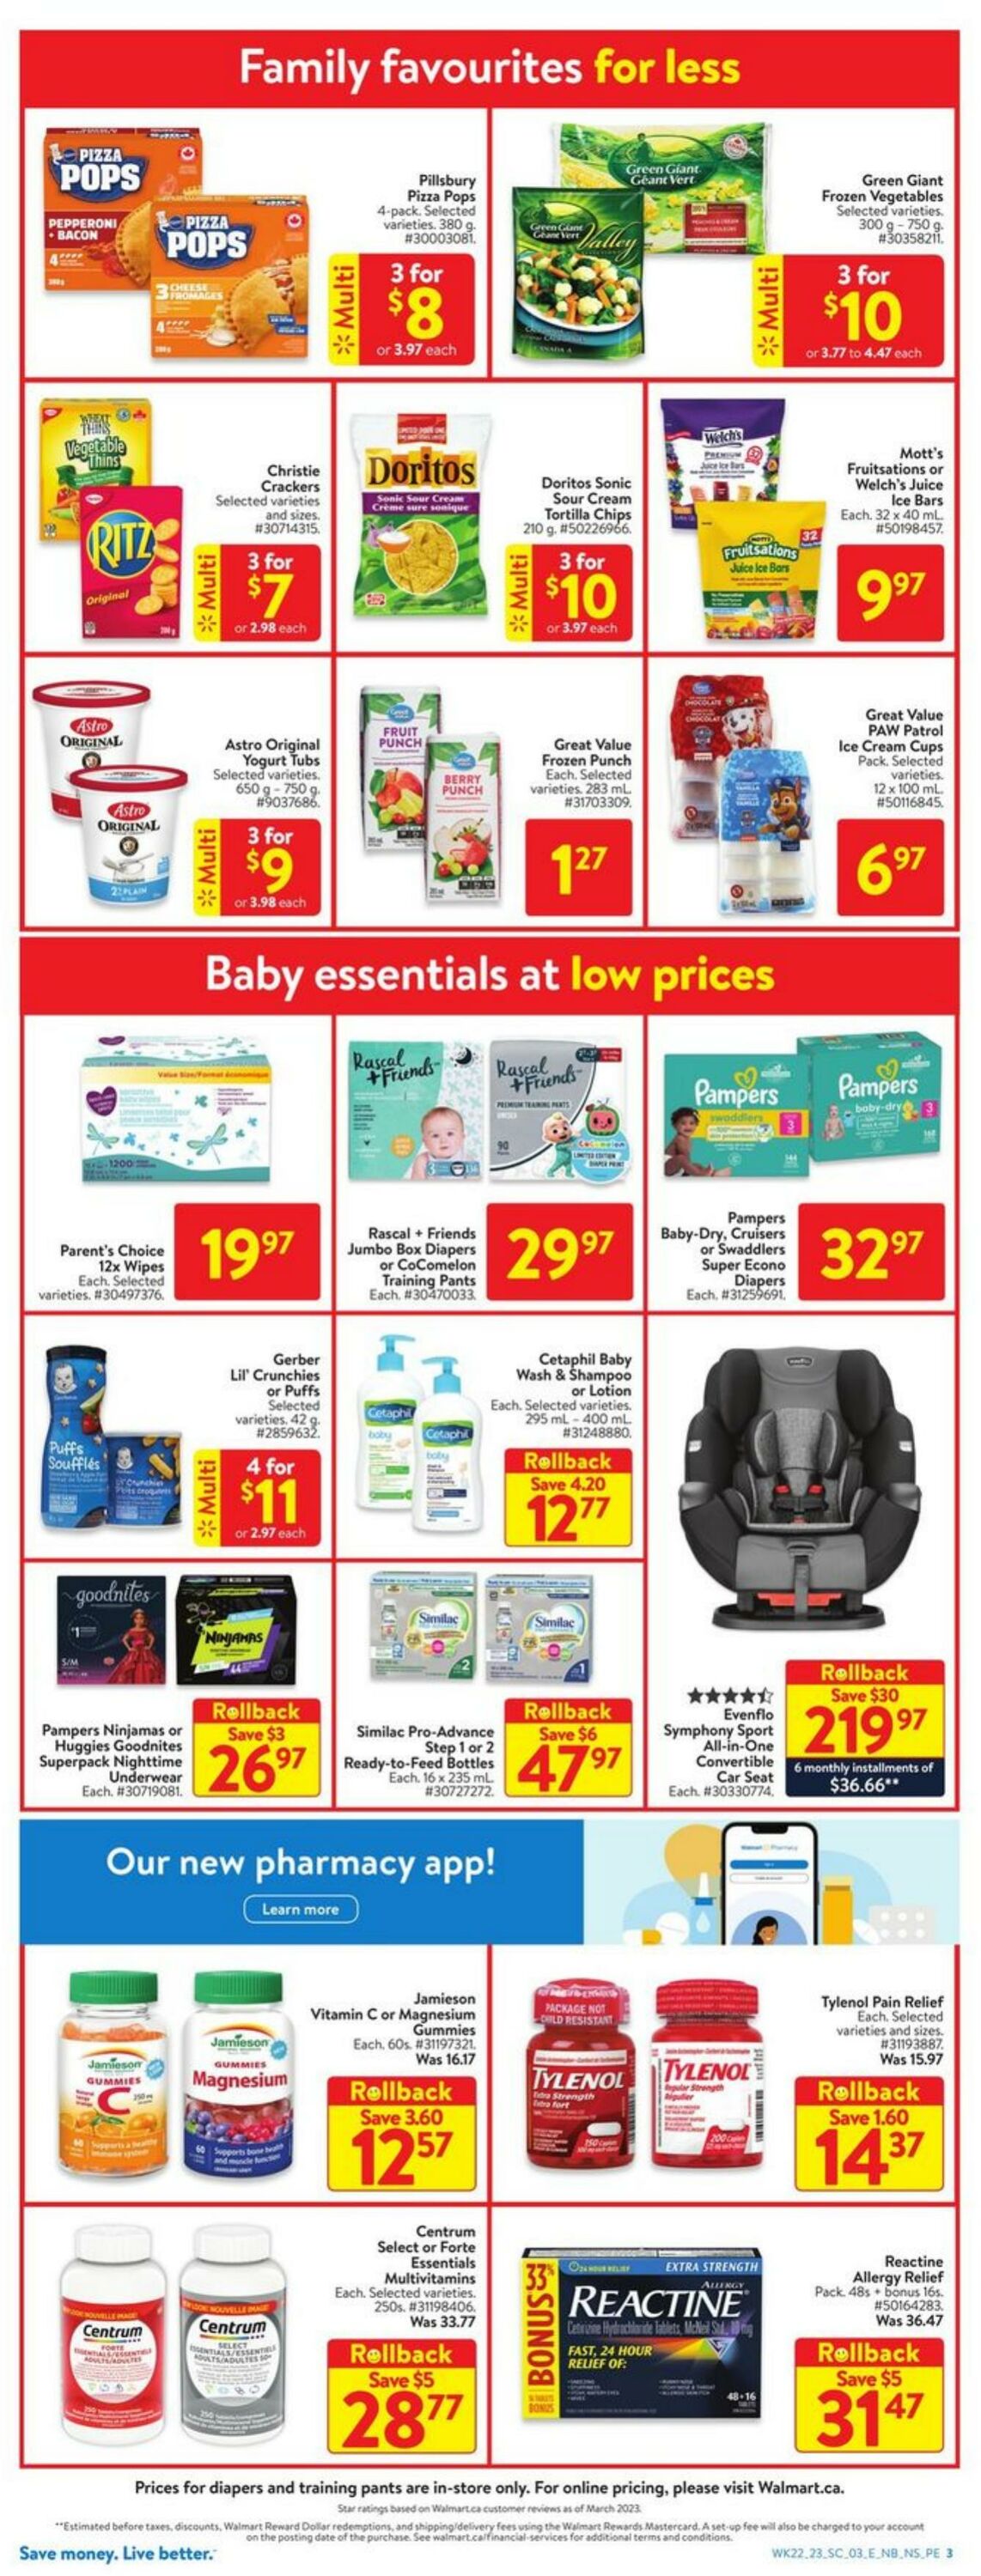 Walmart Promotional Flyer Nova Scotia Valid from 22.06 to 28.06